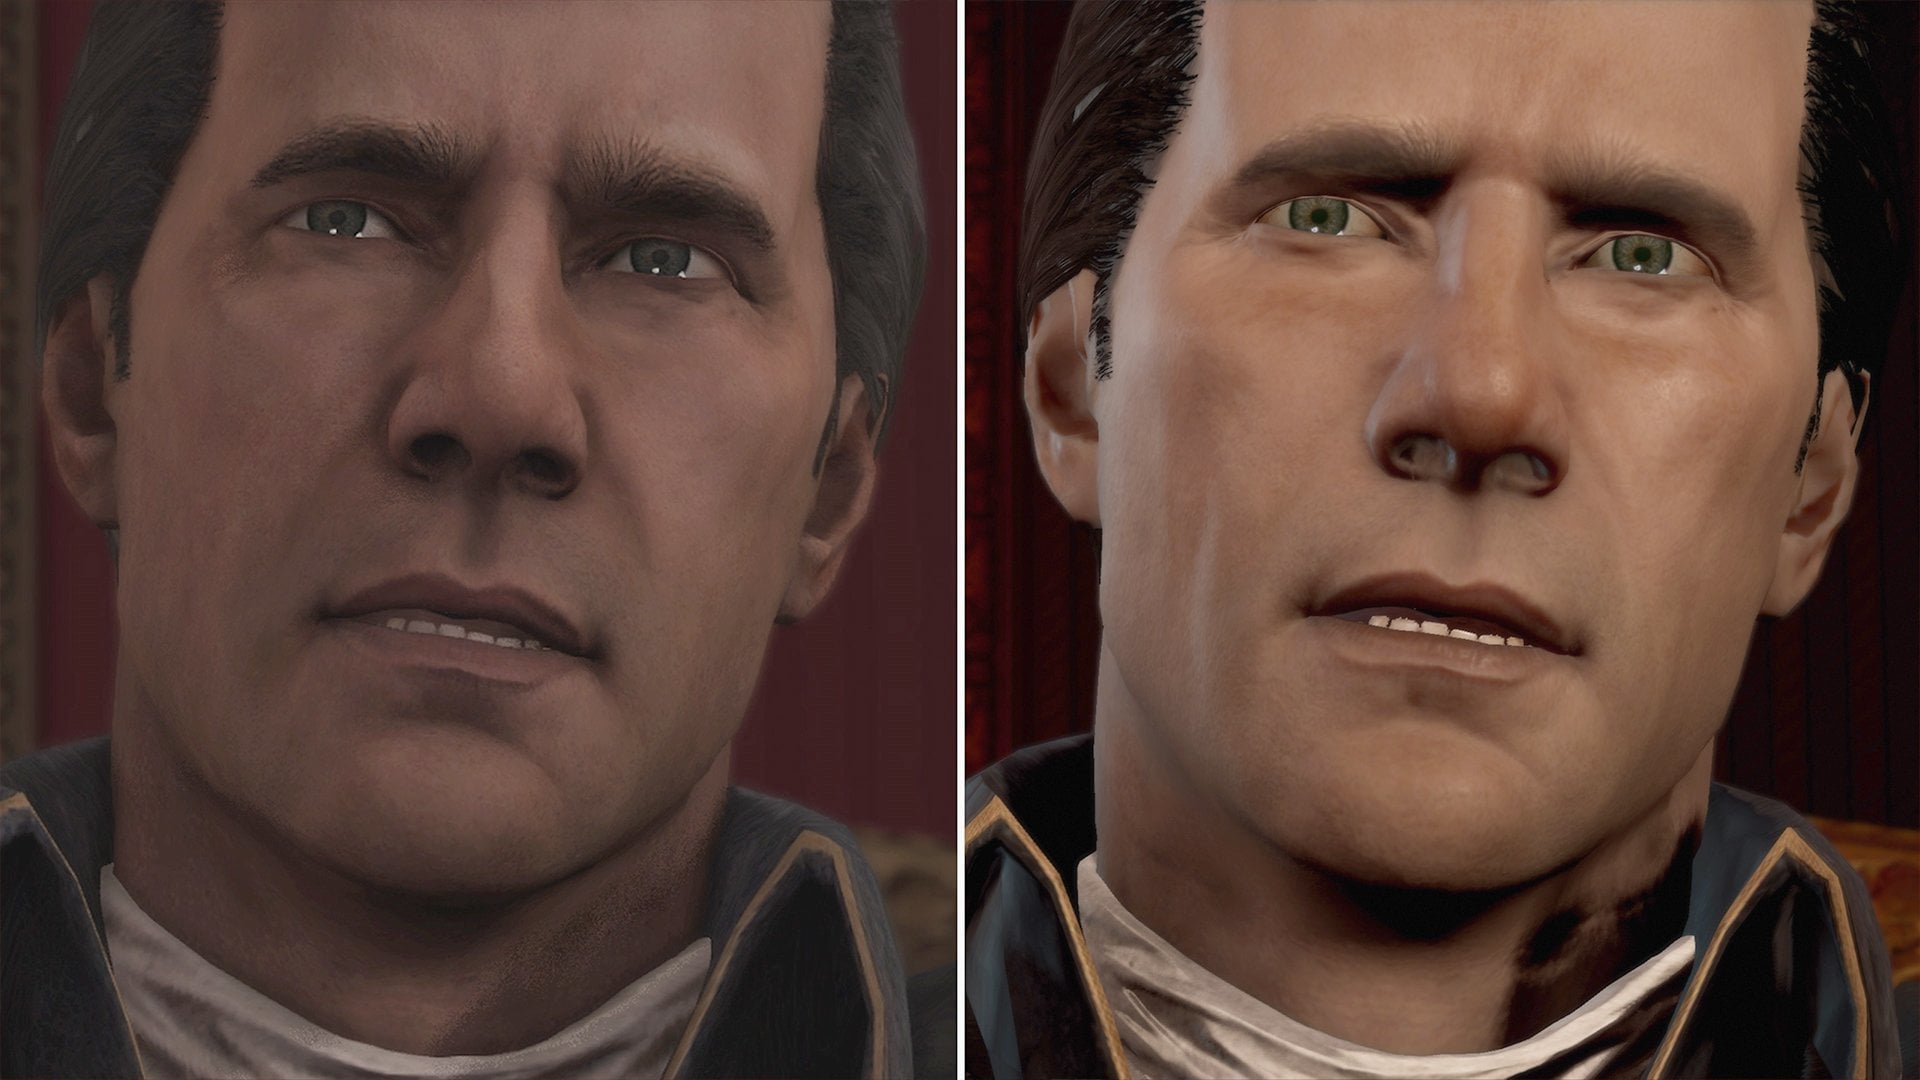 Ps3 patches. Ac3 vs ac3 Remastered. AC 3 Remastered. Ac3 Remastered vs Original. Assassin's Creed 3 Remastered.